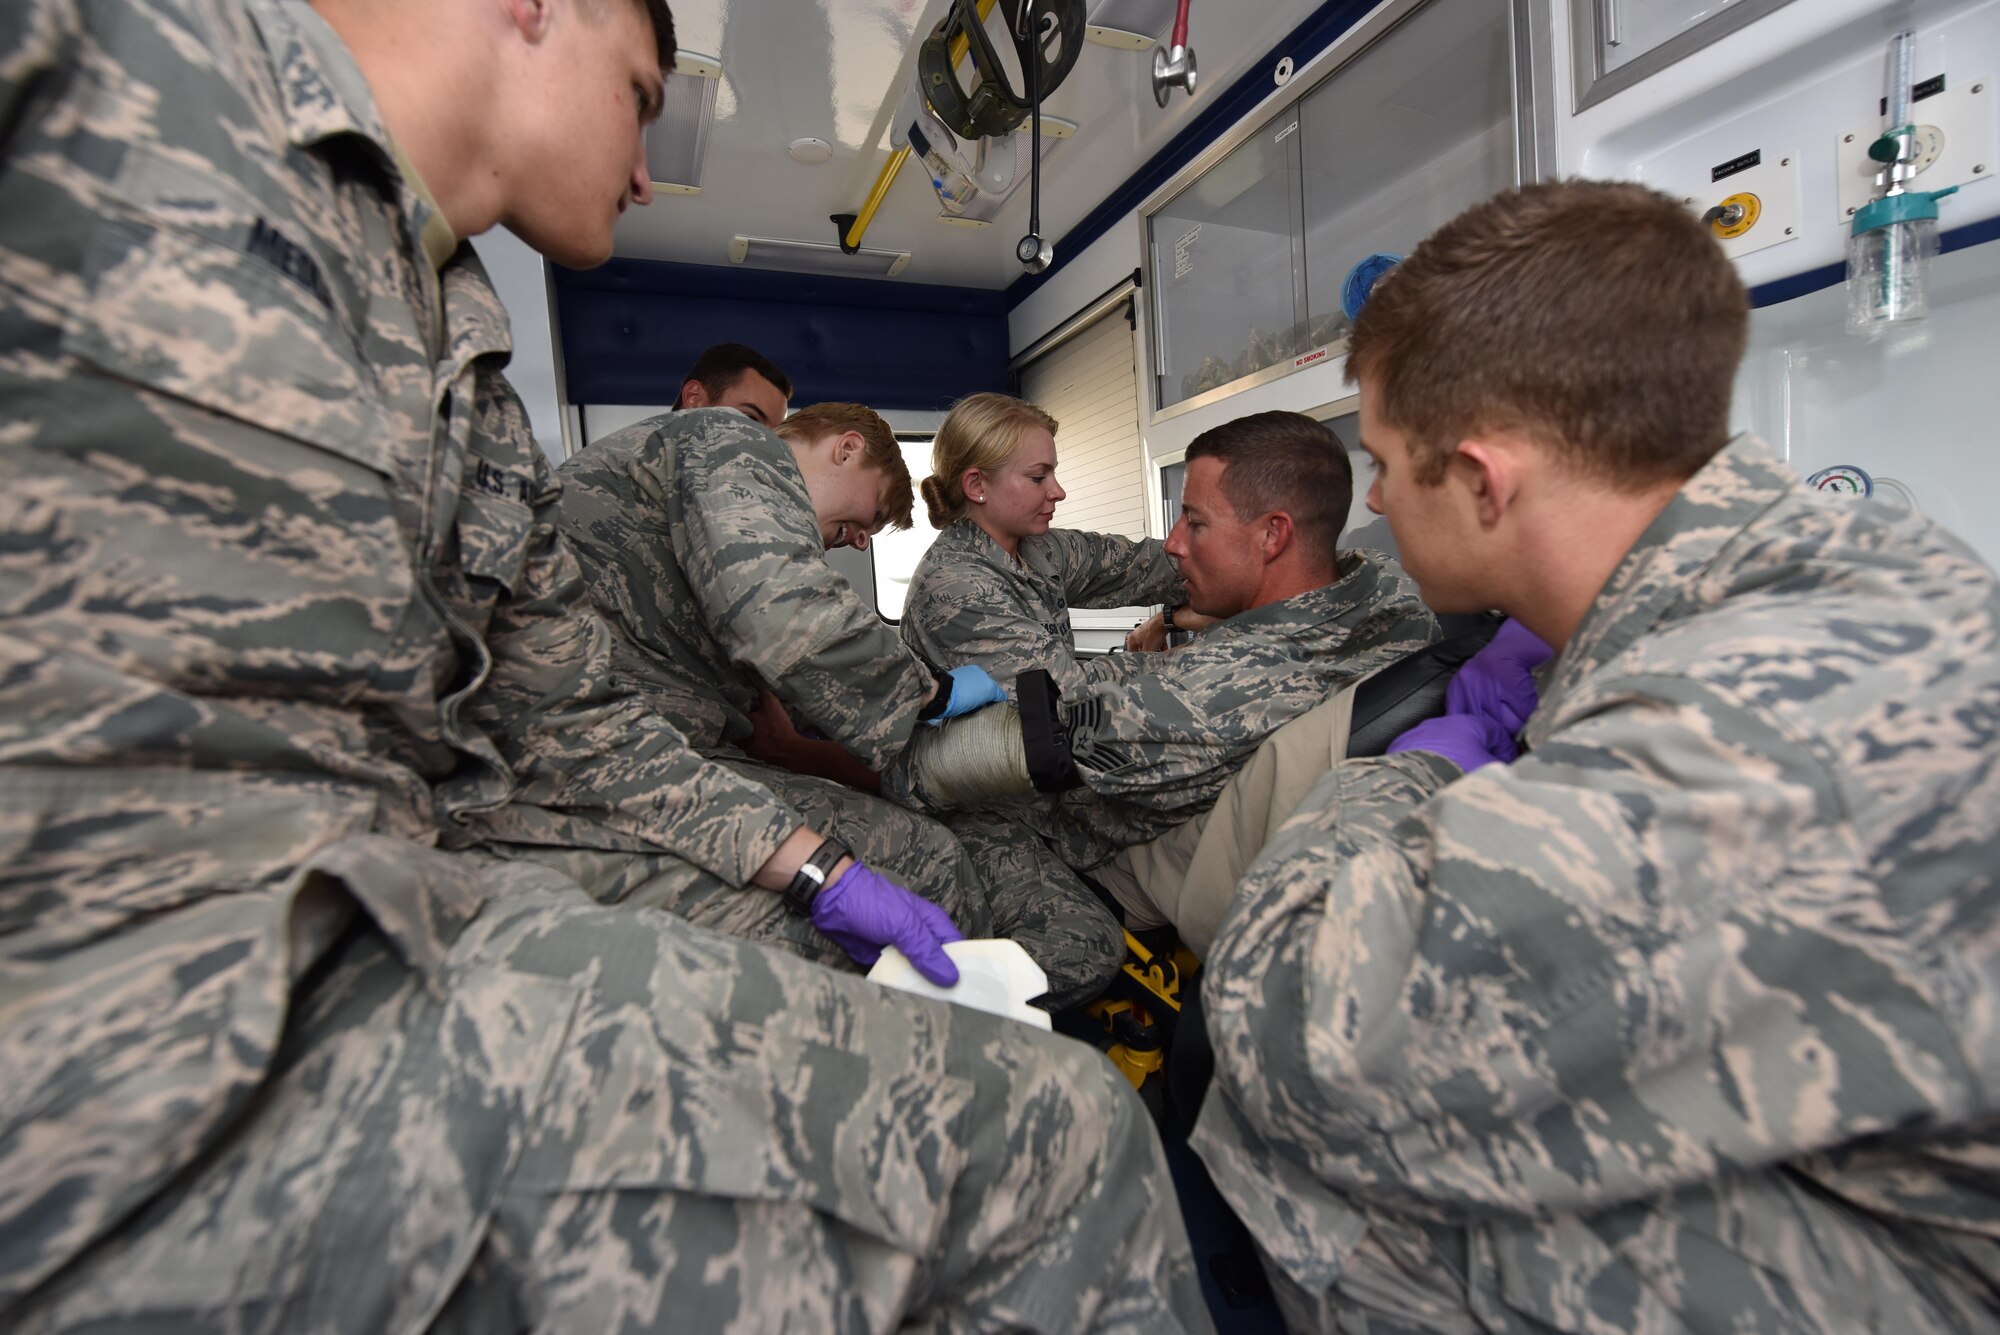 U.S. Air Force Academy cadets practice hemhorrage control techniques on Tech. Sgt. Ryan Folks, 27th Expeditionary Fighter Squadron medical element, in the back of an ambulance at an undisclosed location in southwest Asia, July 6, 2017. Cadets visited the 380th Air Expeditionary Wing and embedded with multiple units across the installation to see firsthand how separate elements of the mission fit into the whole. (U.S. Air Force photo by Staff Sgt. Marjorie A. Bowlden)